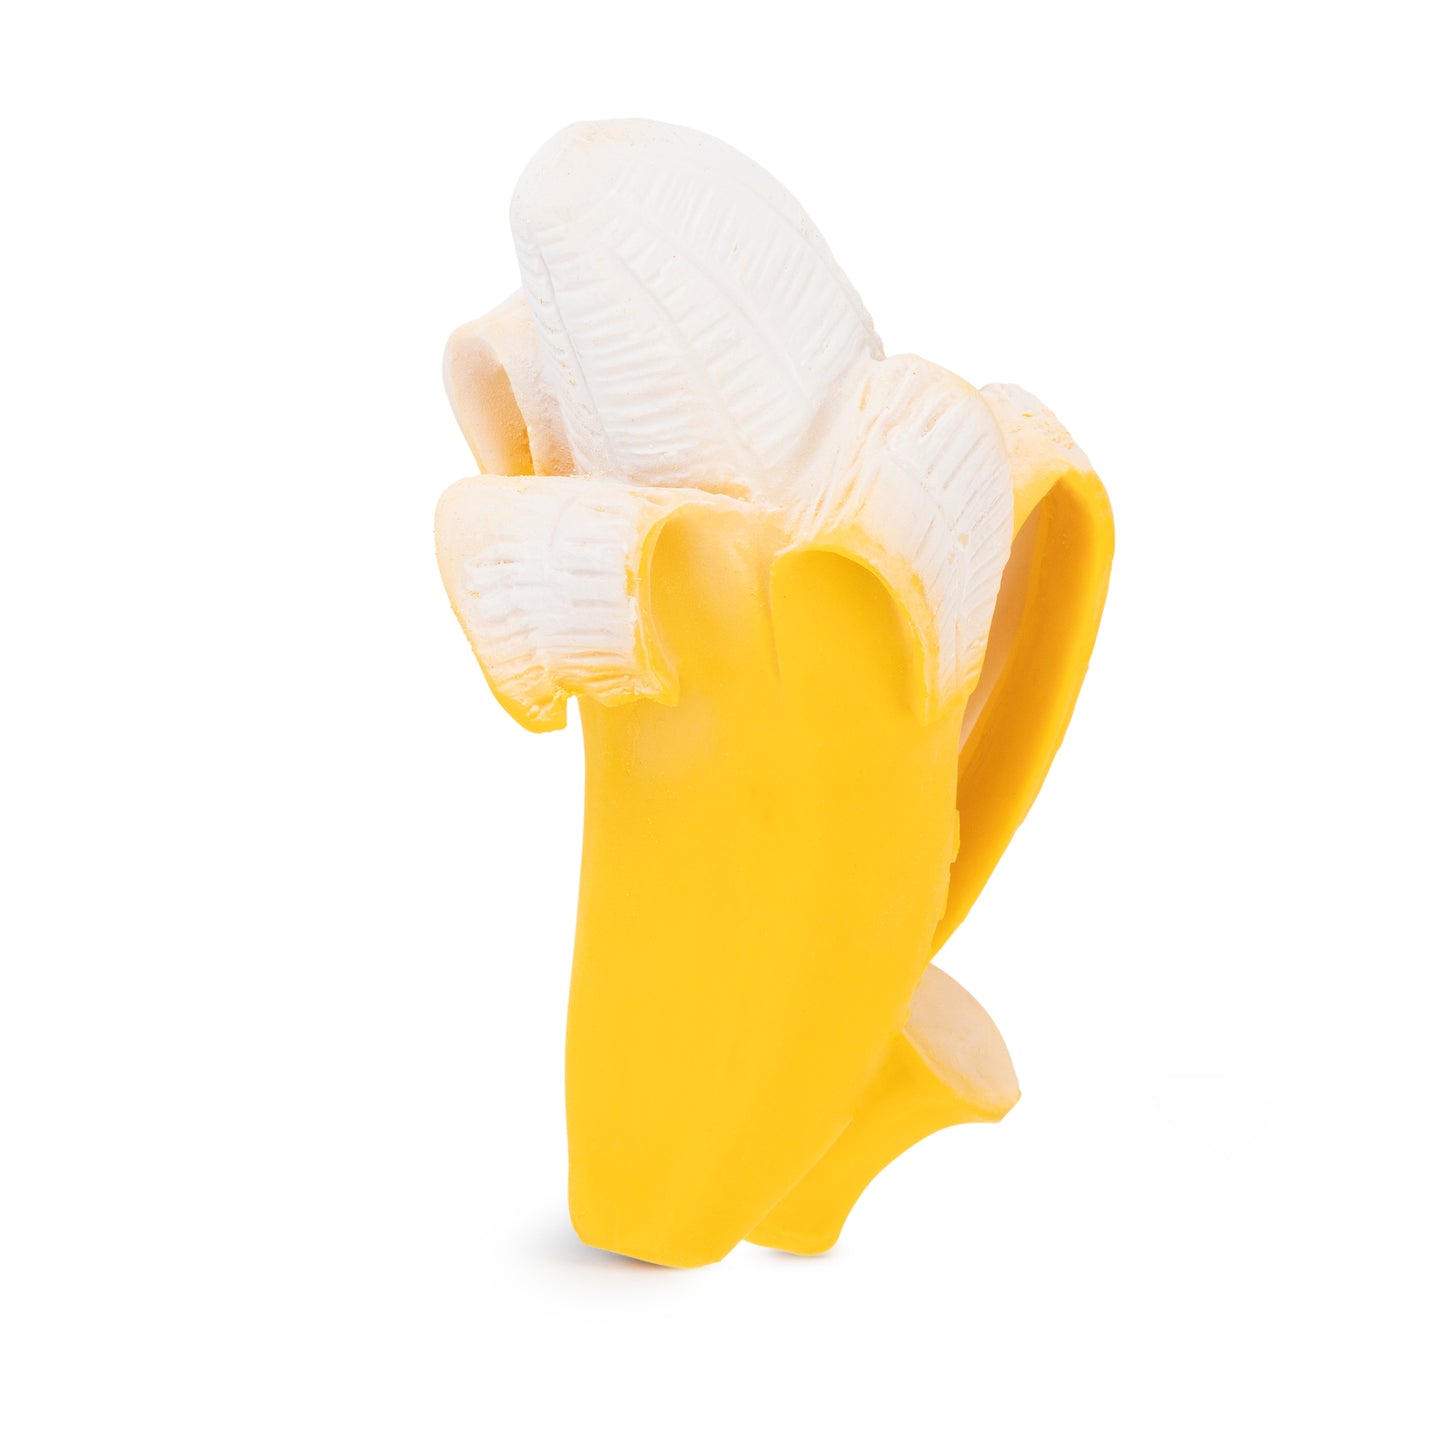 The Every Space Ana Banana natural rubber chewable teether by Oli & Carol